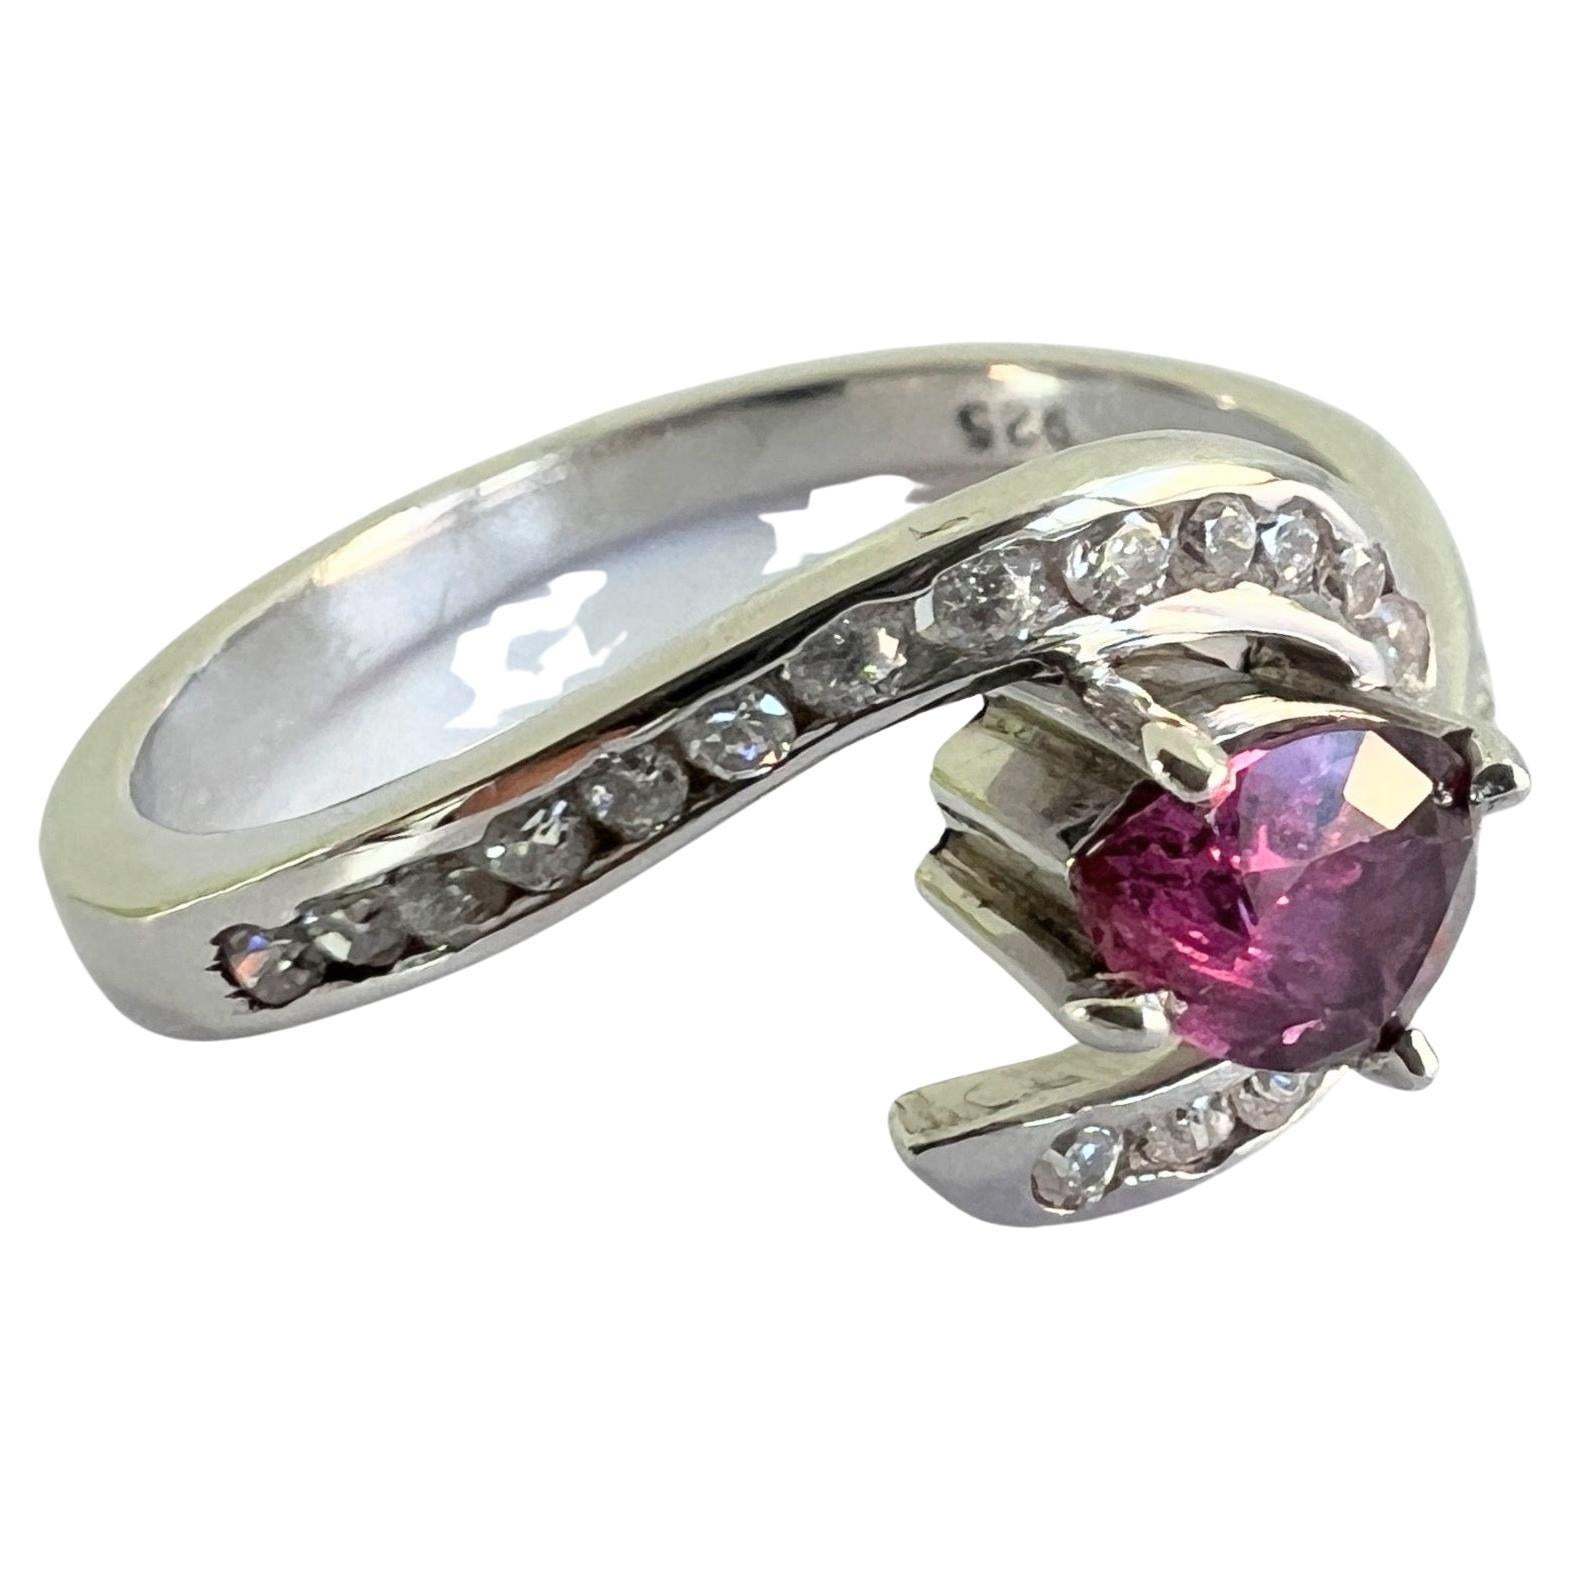 Indulge in the ultimate expression of love and luxury with this EGL Certified 1ct Pink Sapphire Ring on Natural Platinum Coated Silver. This enchanting piece showcases a 5.8x4.8mm pear-shaped natural origin pink sapphire, radiating with a soft,